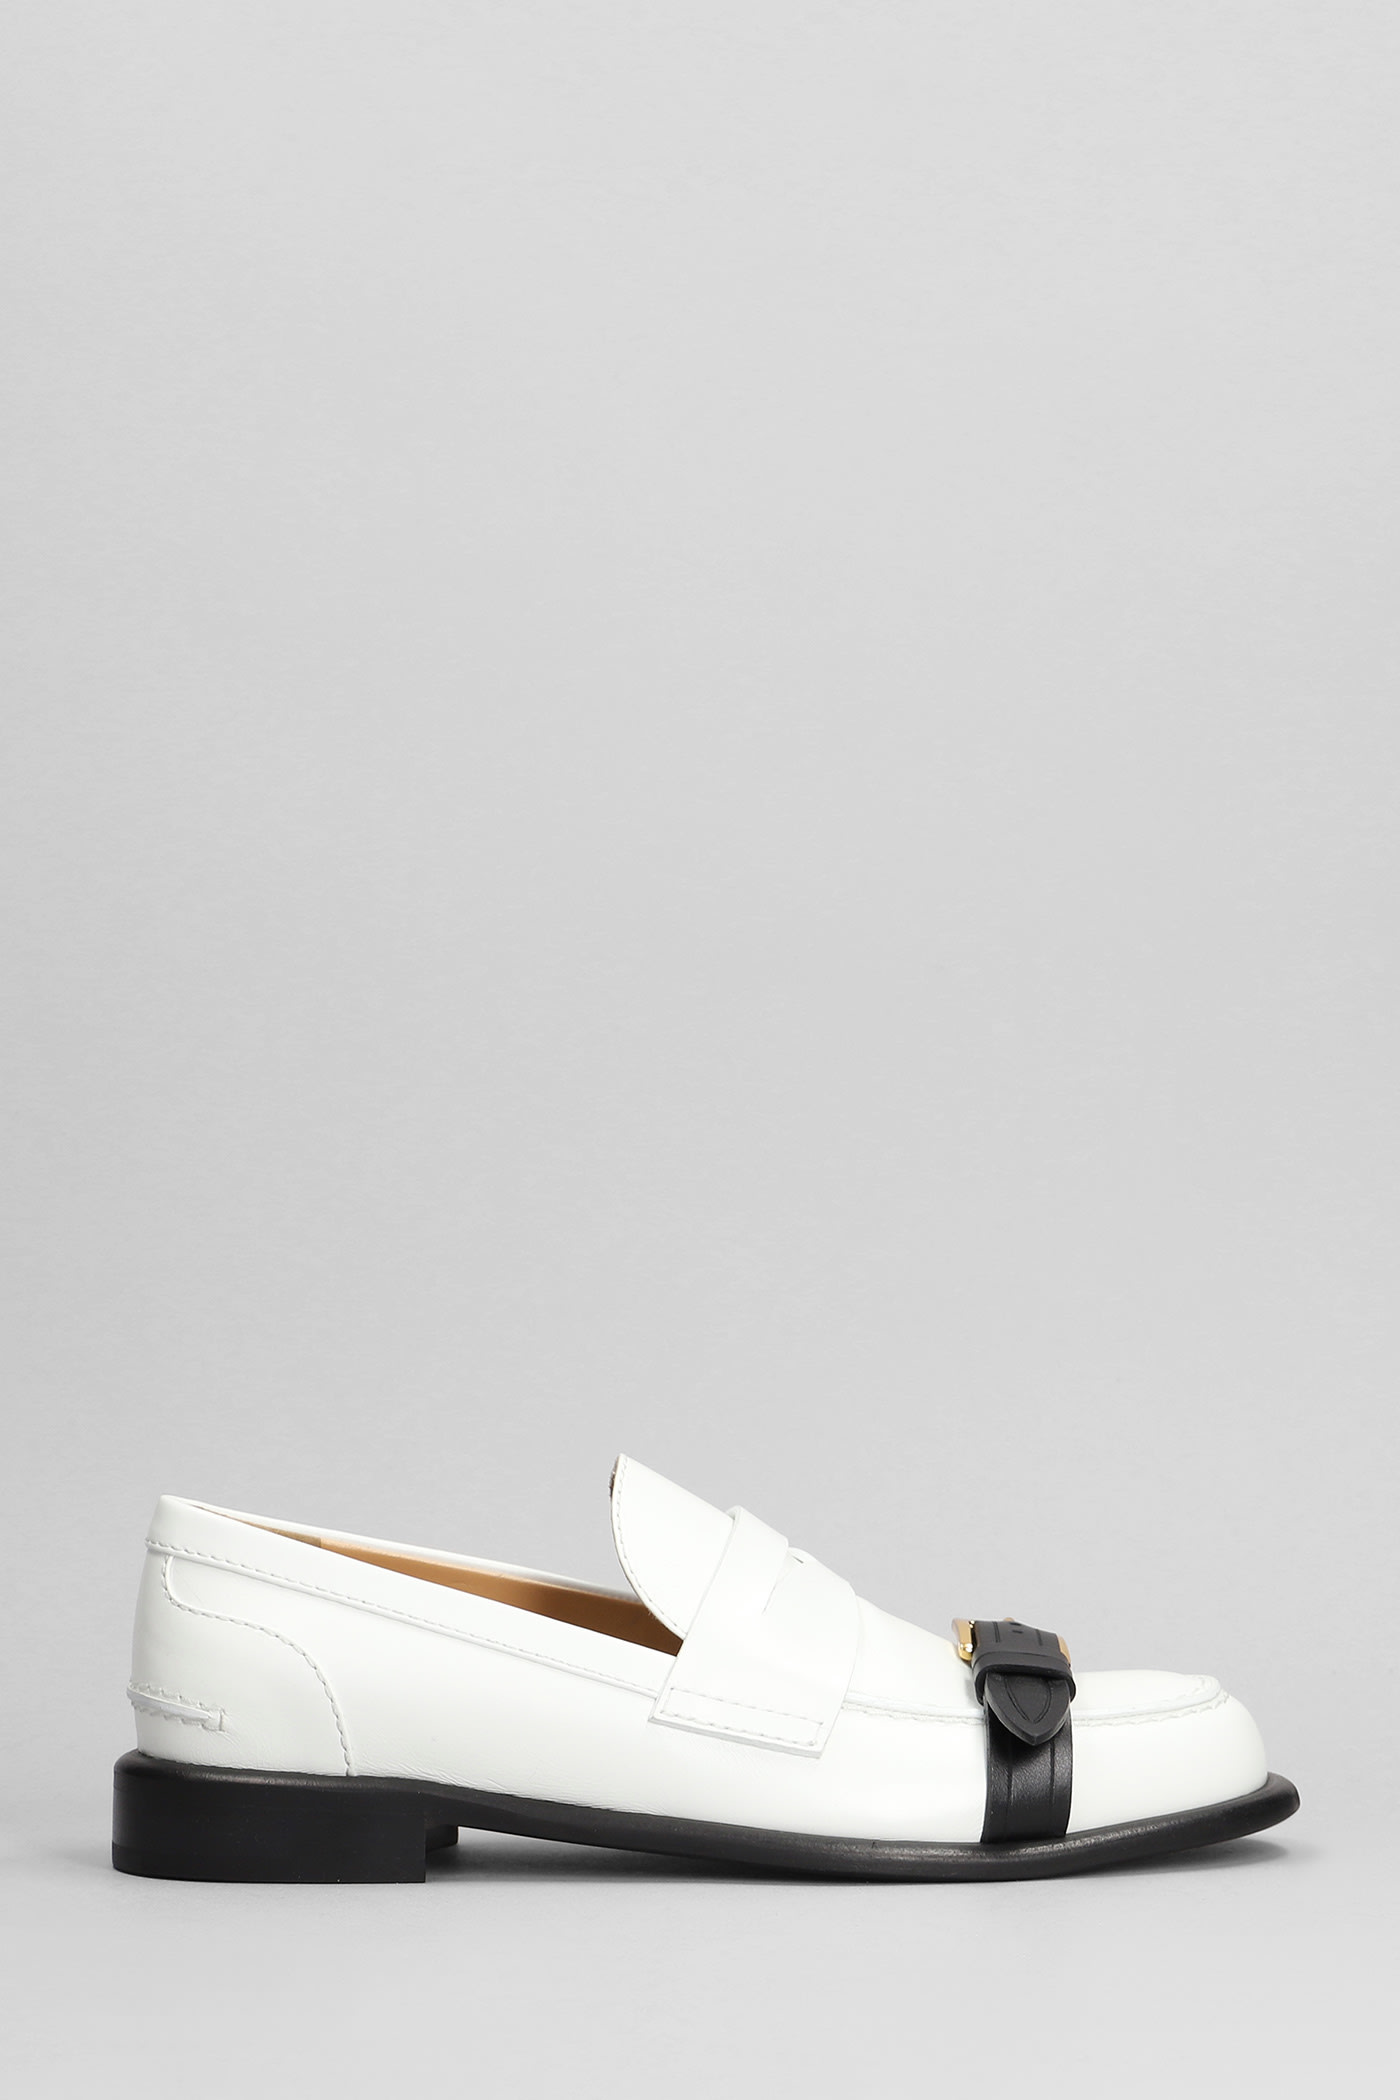 J.W. Anderson Animated Mocassin Loafers In White Leather